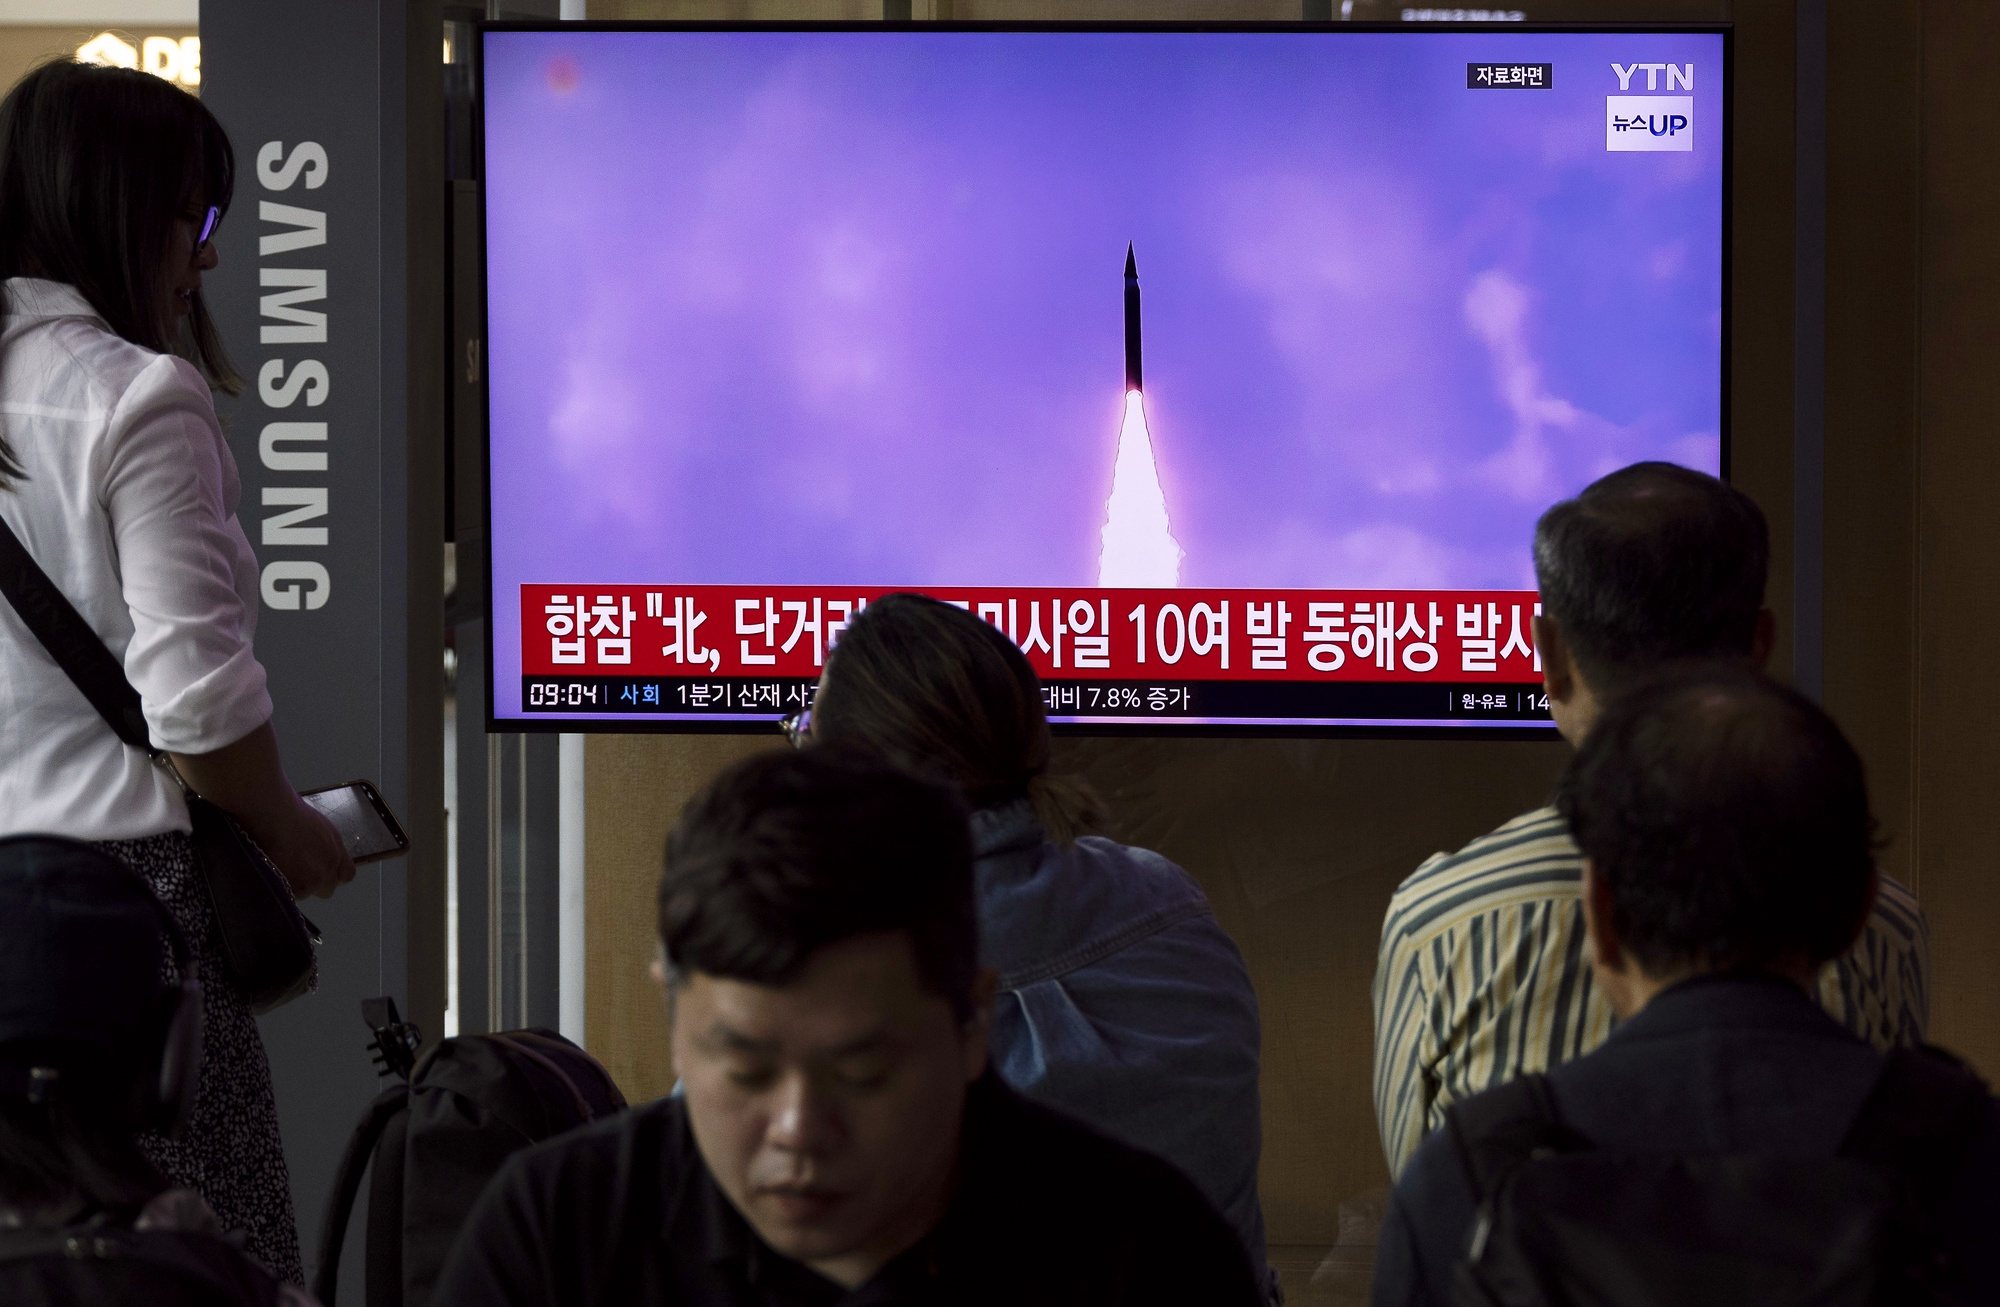 epaselect epa11378591 epa11378570 People watch a news segment on North Korea, at a station in Seoul, South Korea, 30 May 2024. According to South Korea&#039;s Joint Chiefs of Staff (JCS), North Korea launched several ballistic missiles into the East Sea on 30 May.  EPA/JEON HEON-KYUN  EPA-EFE/JEON HEON-KYUN ALTERNATE TONING AND CROP